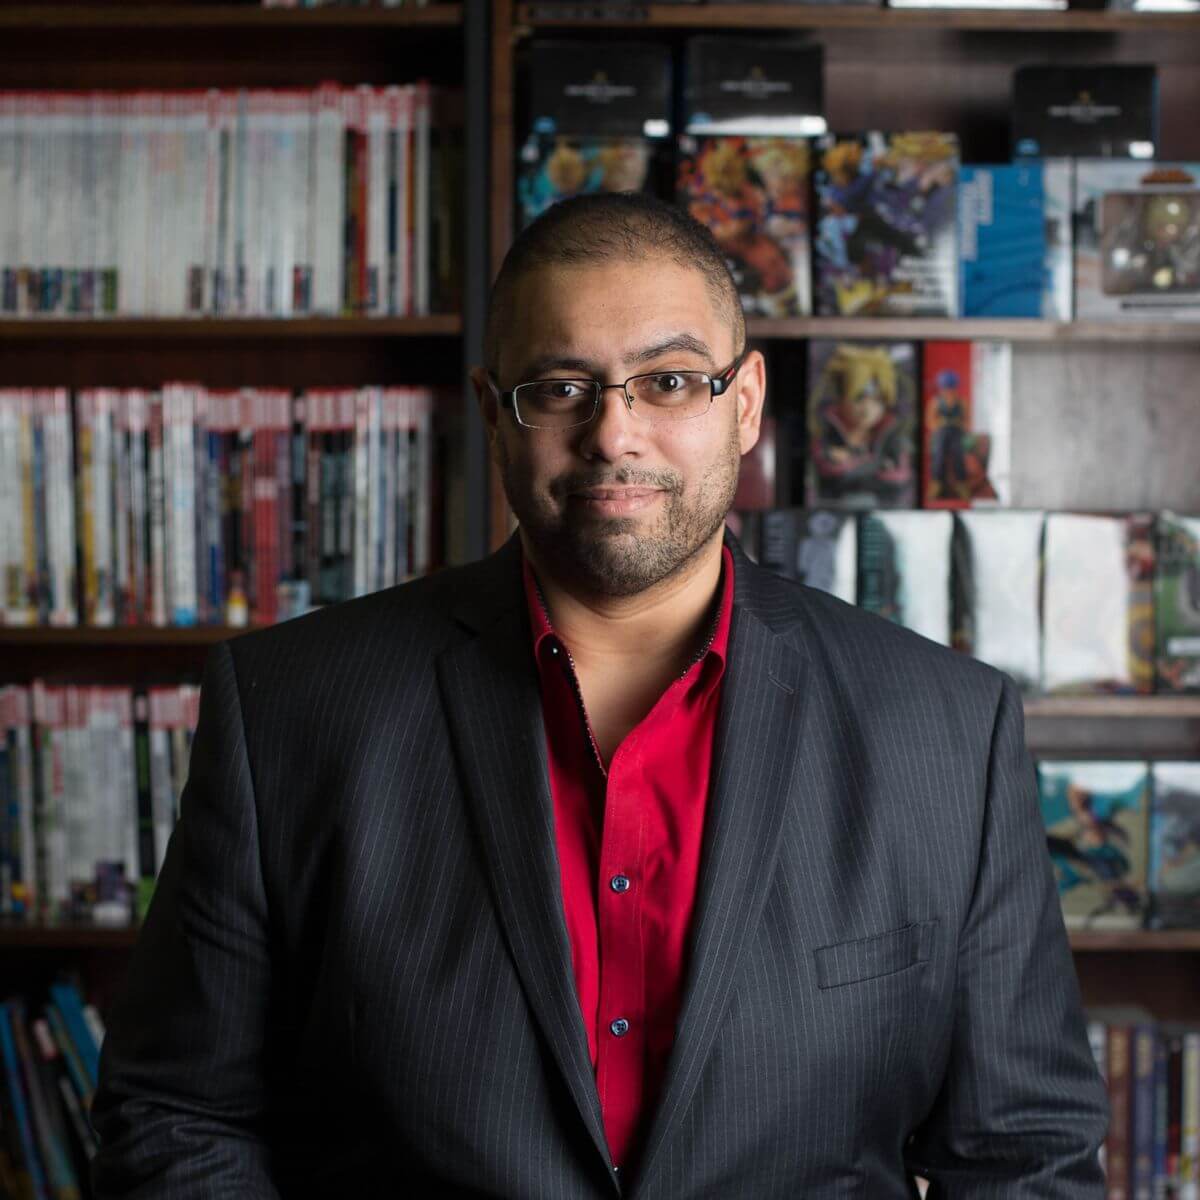 Professional headshot of Bilal Qizilbash, CEO of EK Foods, wearing a black suit and a red dress shirt.